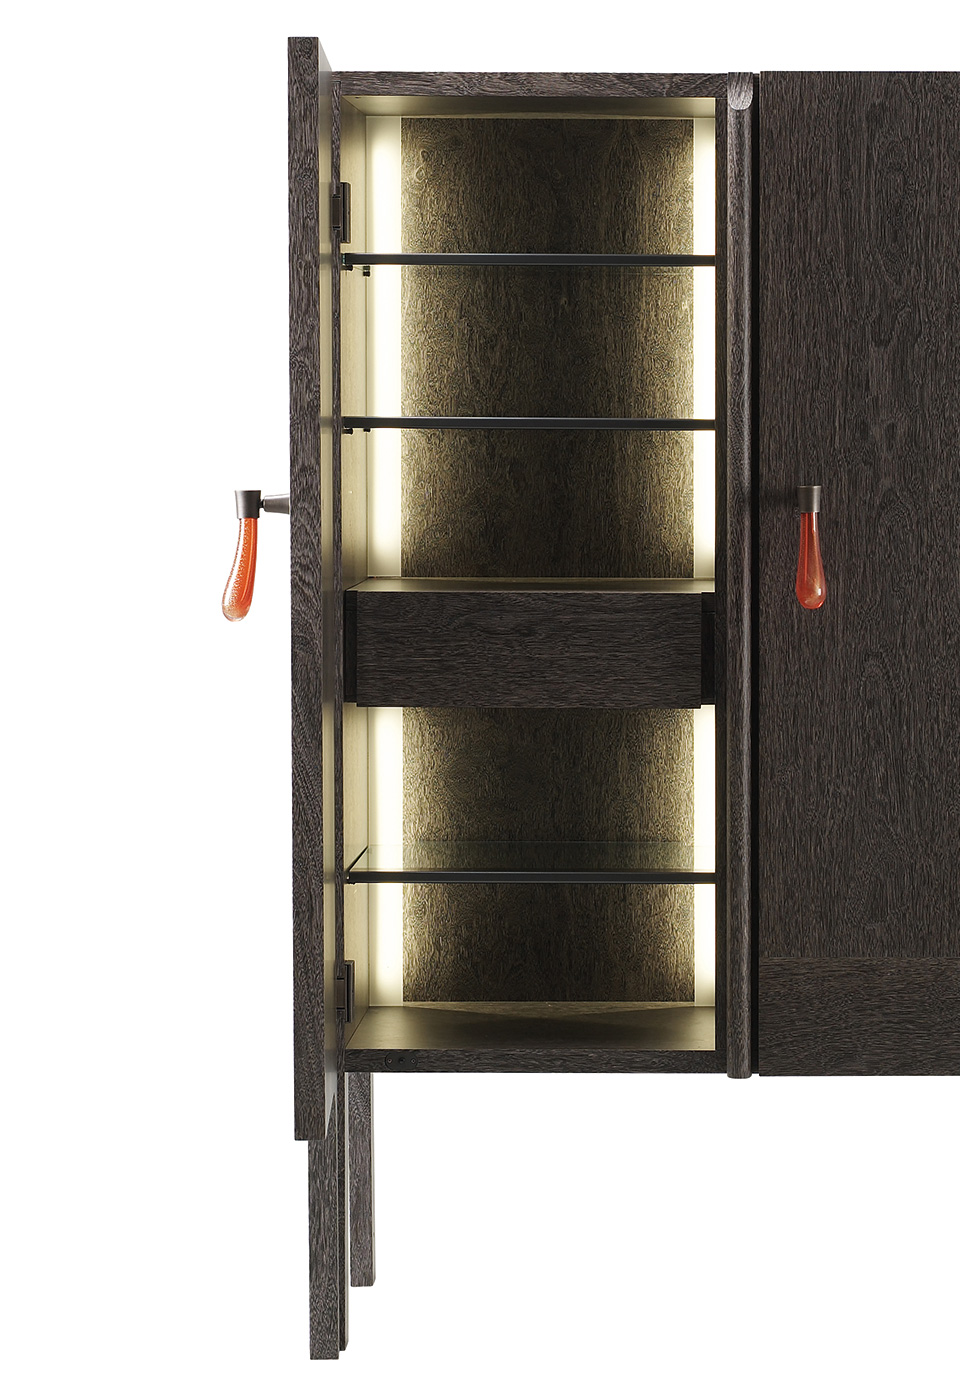 Inside of Tom Bombadil, a wooden cabinet with bronze profiles and a Murano glass handle, from Promemoria's catalogue | Promemoria